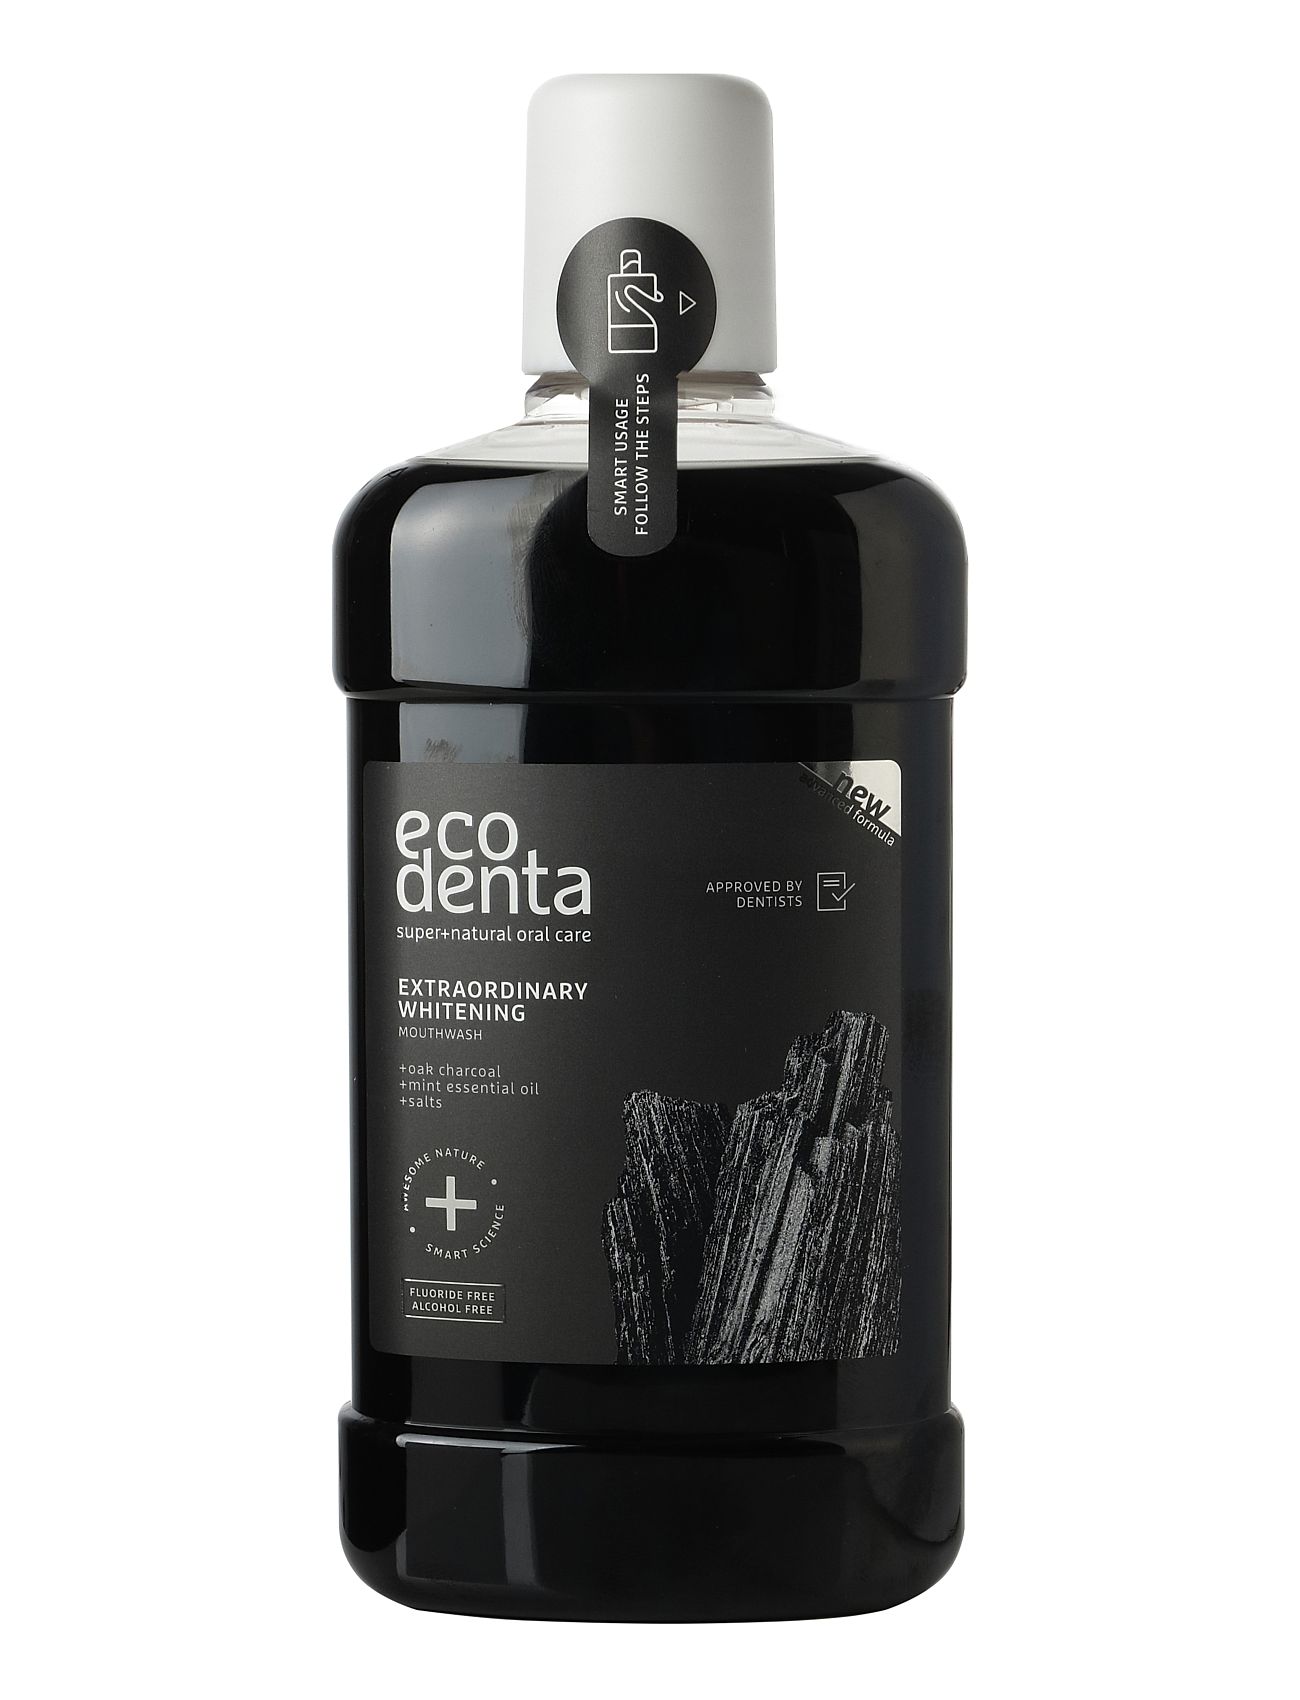 Ecodenta Extraordinary Whitening Charcoal Mouthwash 500 Ml Beauty Women Home Oral Hygiene Mouth Wash Nude Ecodenta